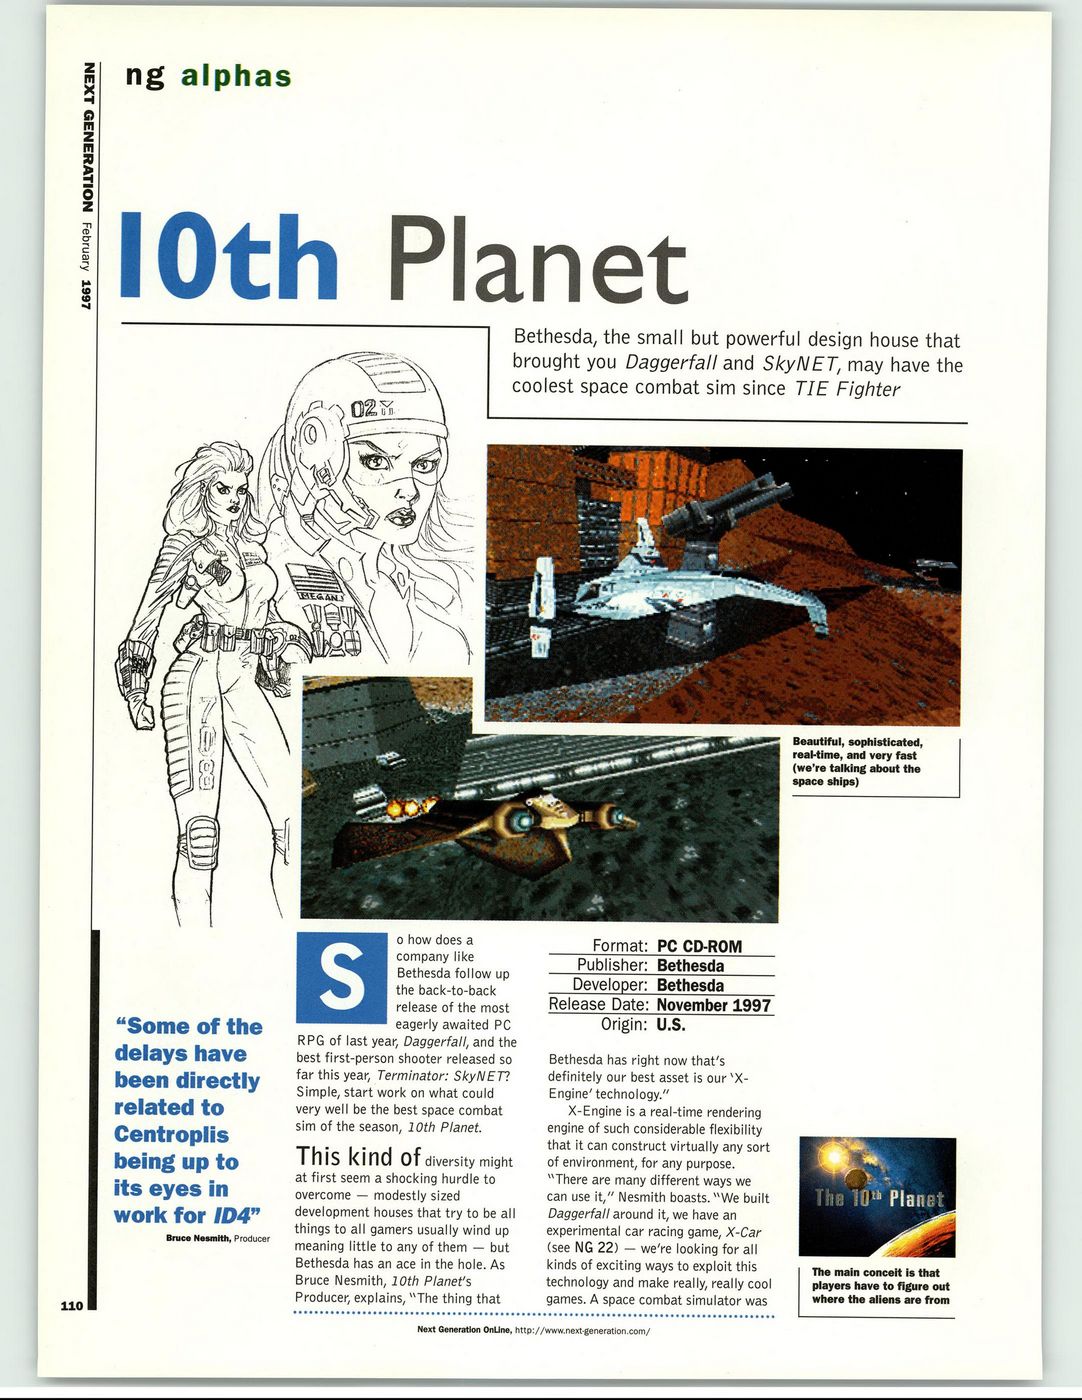 10th-planed-bethesda-space-combat-cancelled-next-gen-00001.jpg